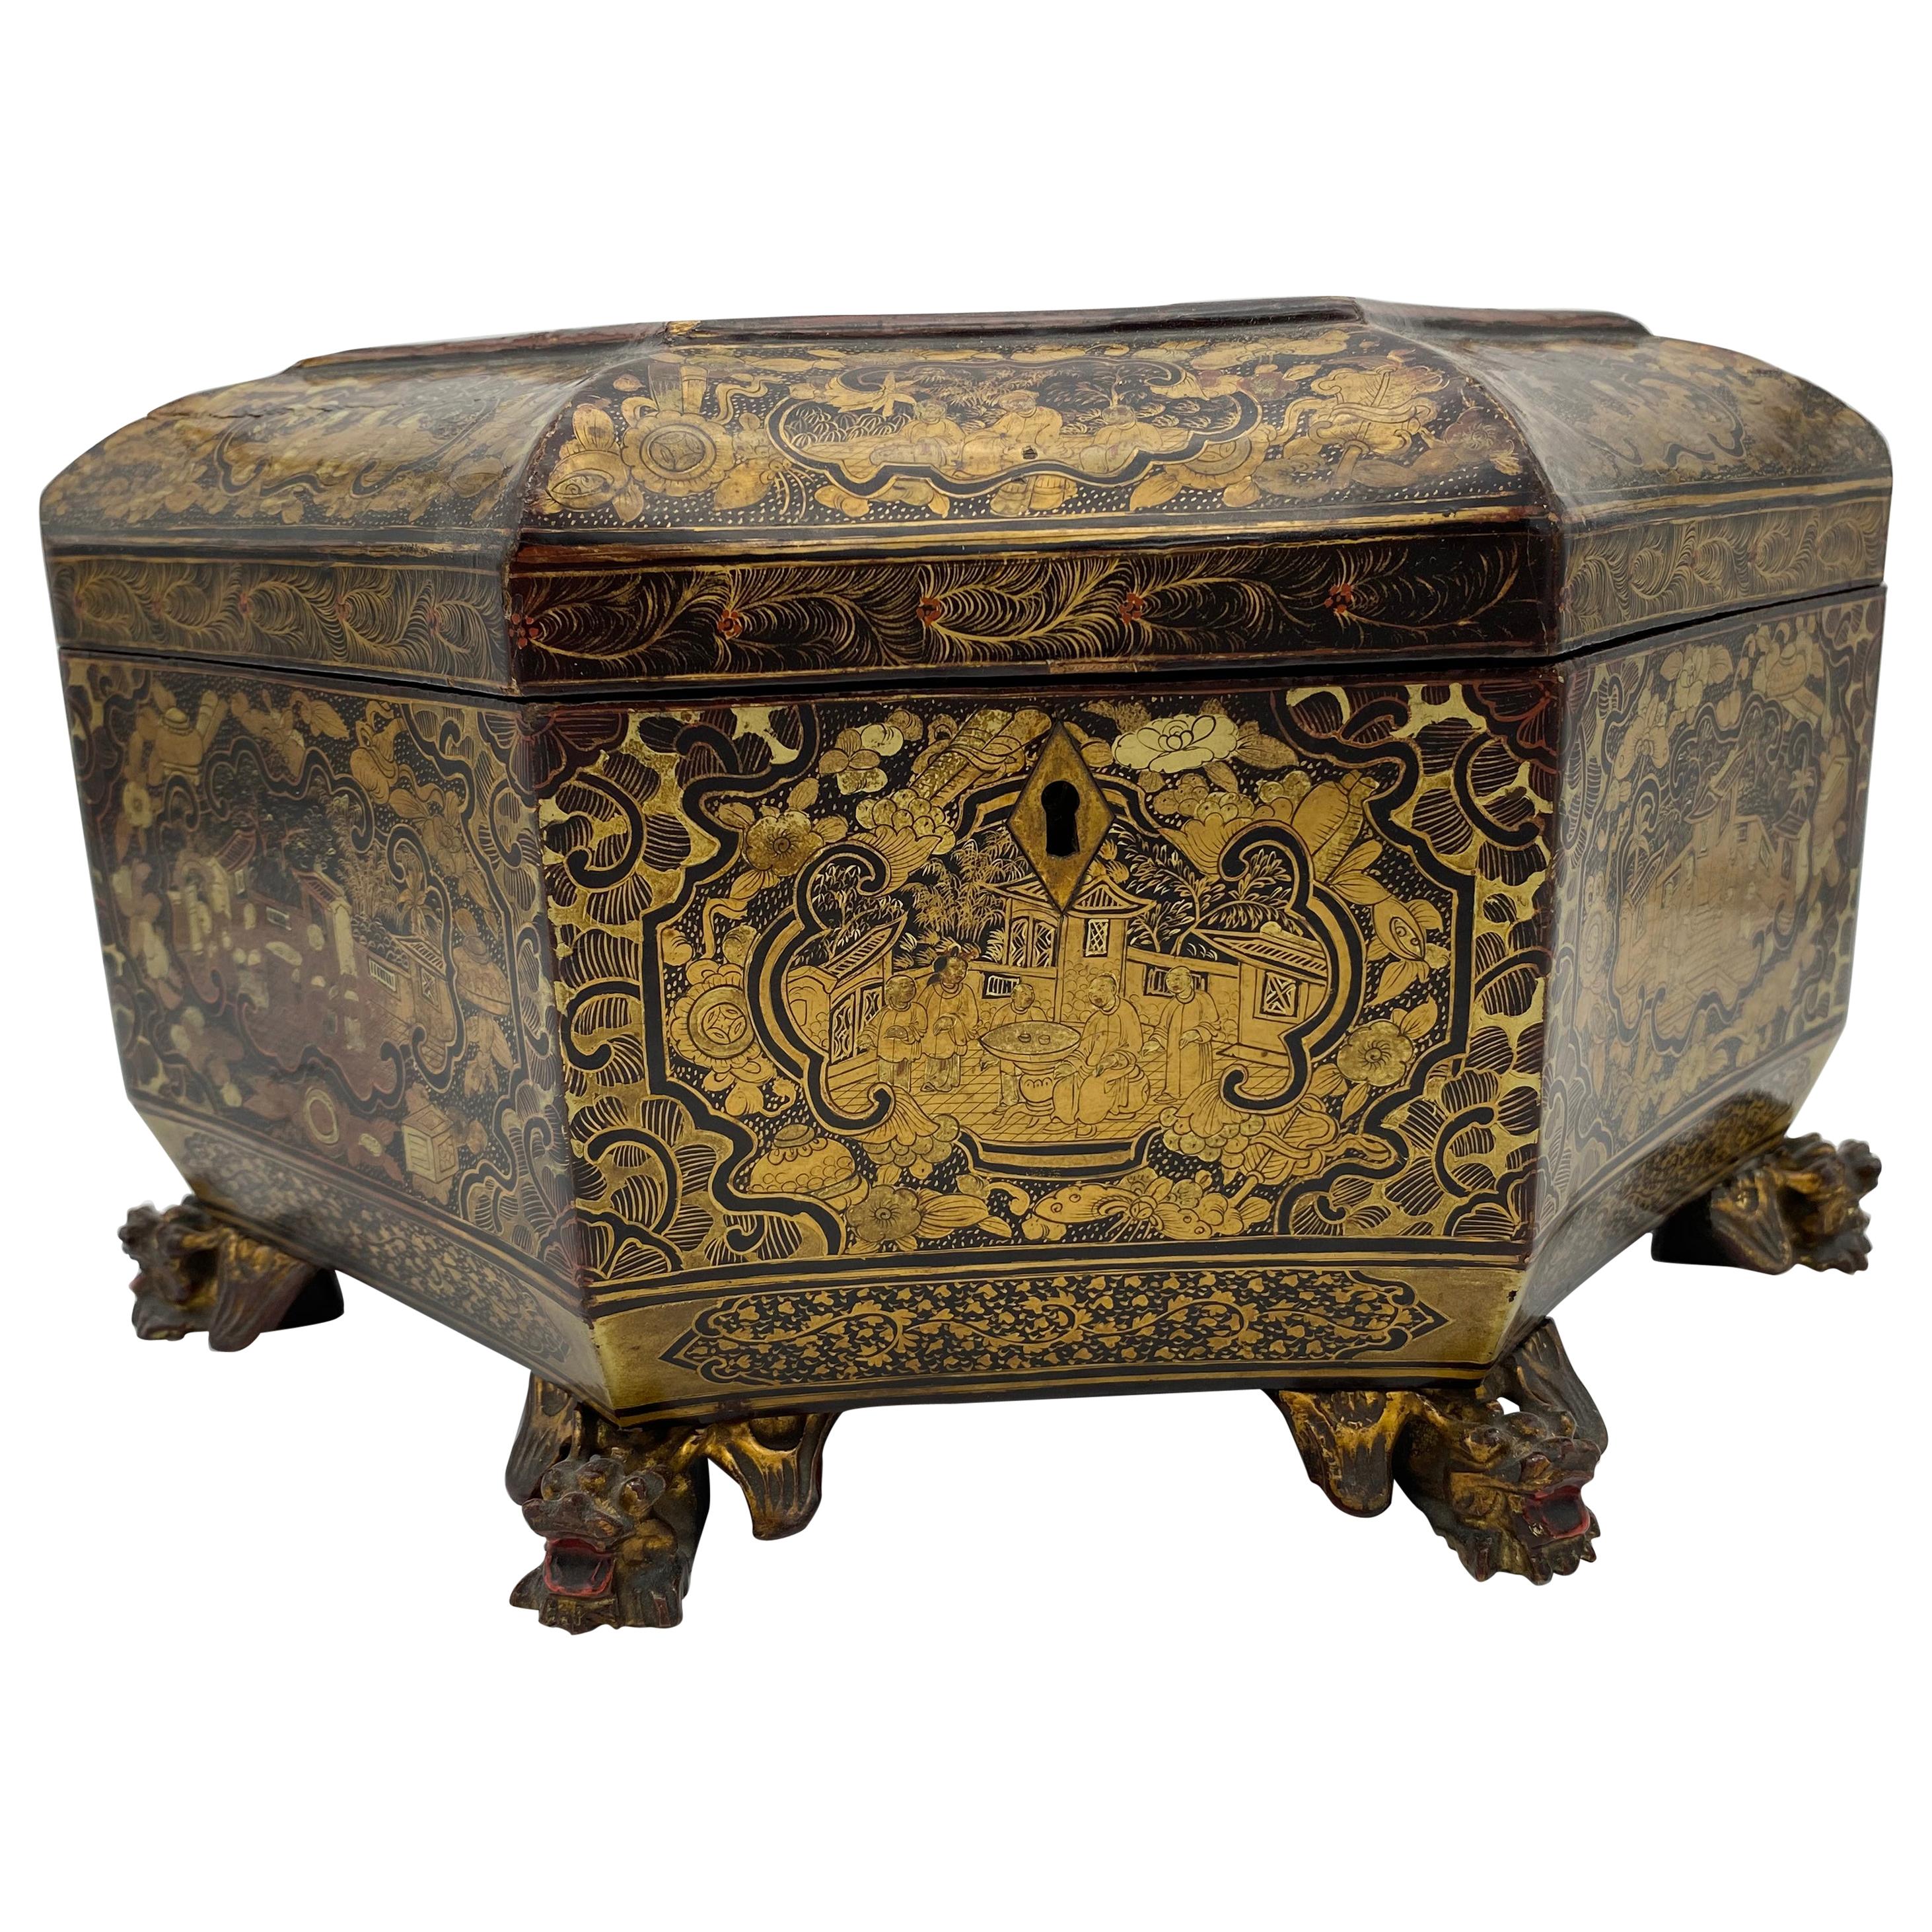 19th Century Chinese Gold Lacquer Tea Caddy